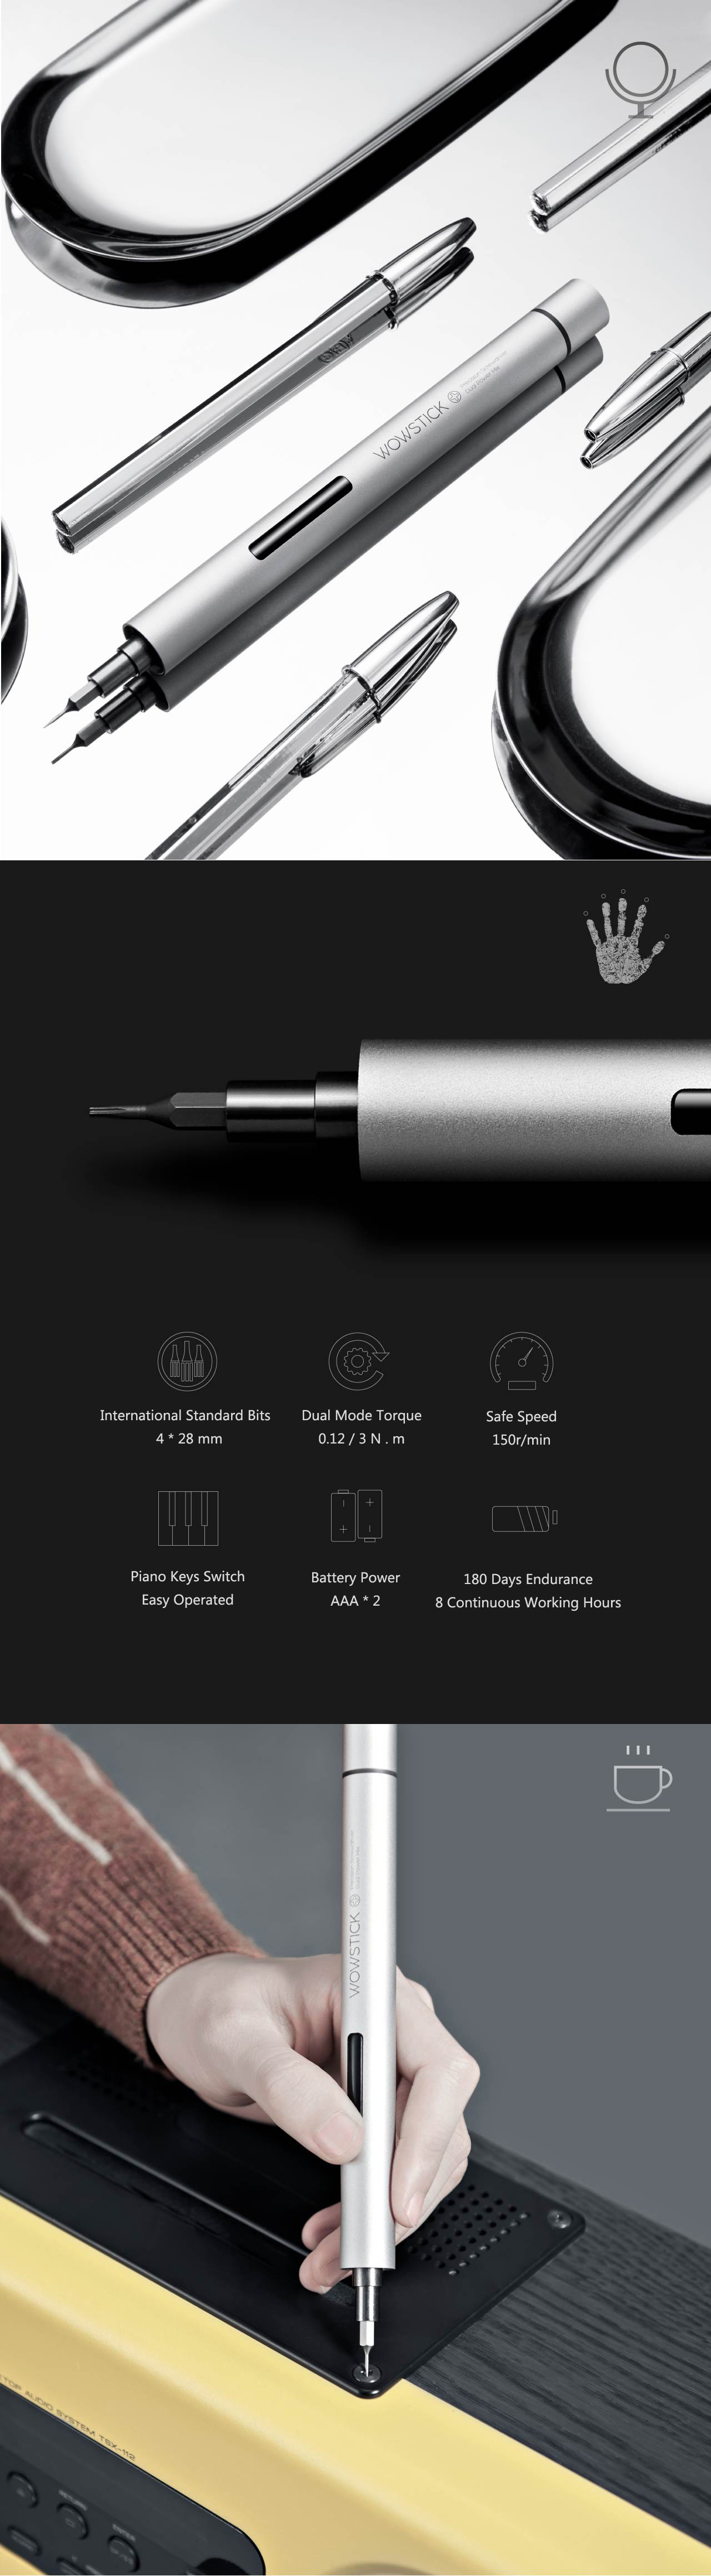 XIAOMI-Wowstick-1P-19-In-1-Electric-Screw-Driver-Cordless-Power-Screwdriver-Repair-Tools-1266074